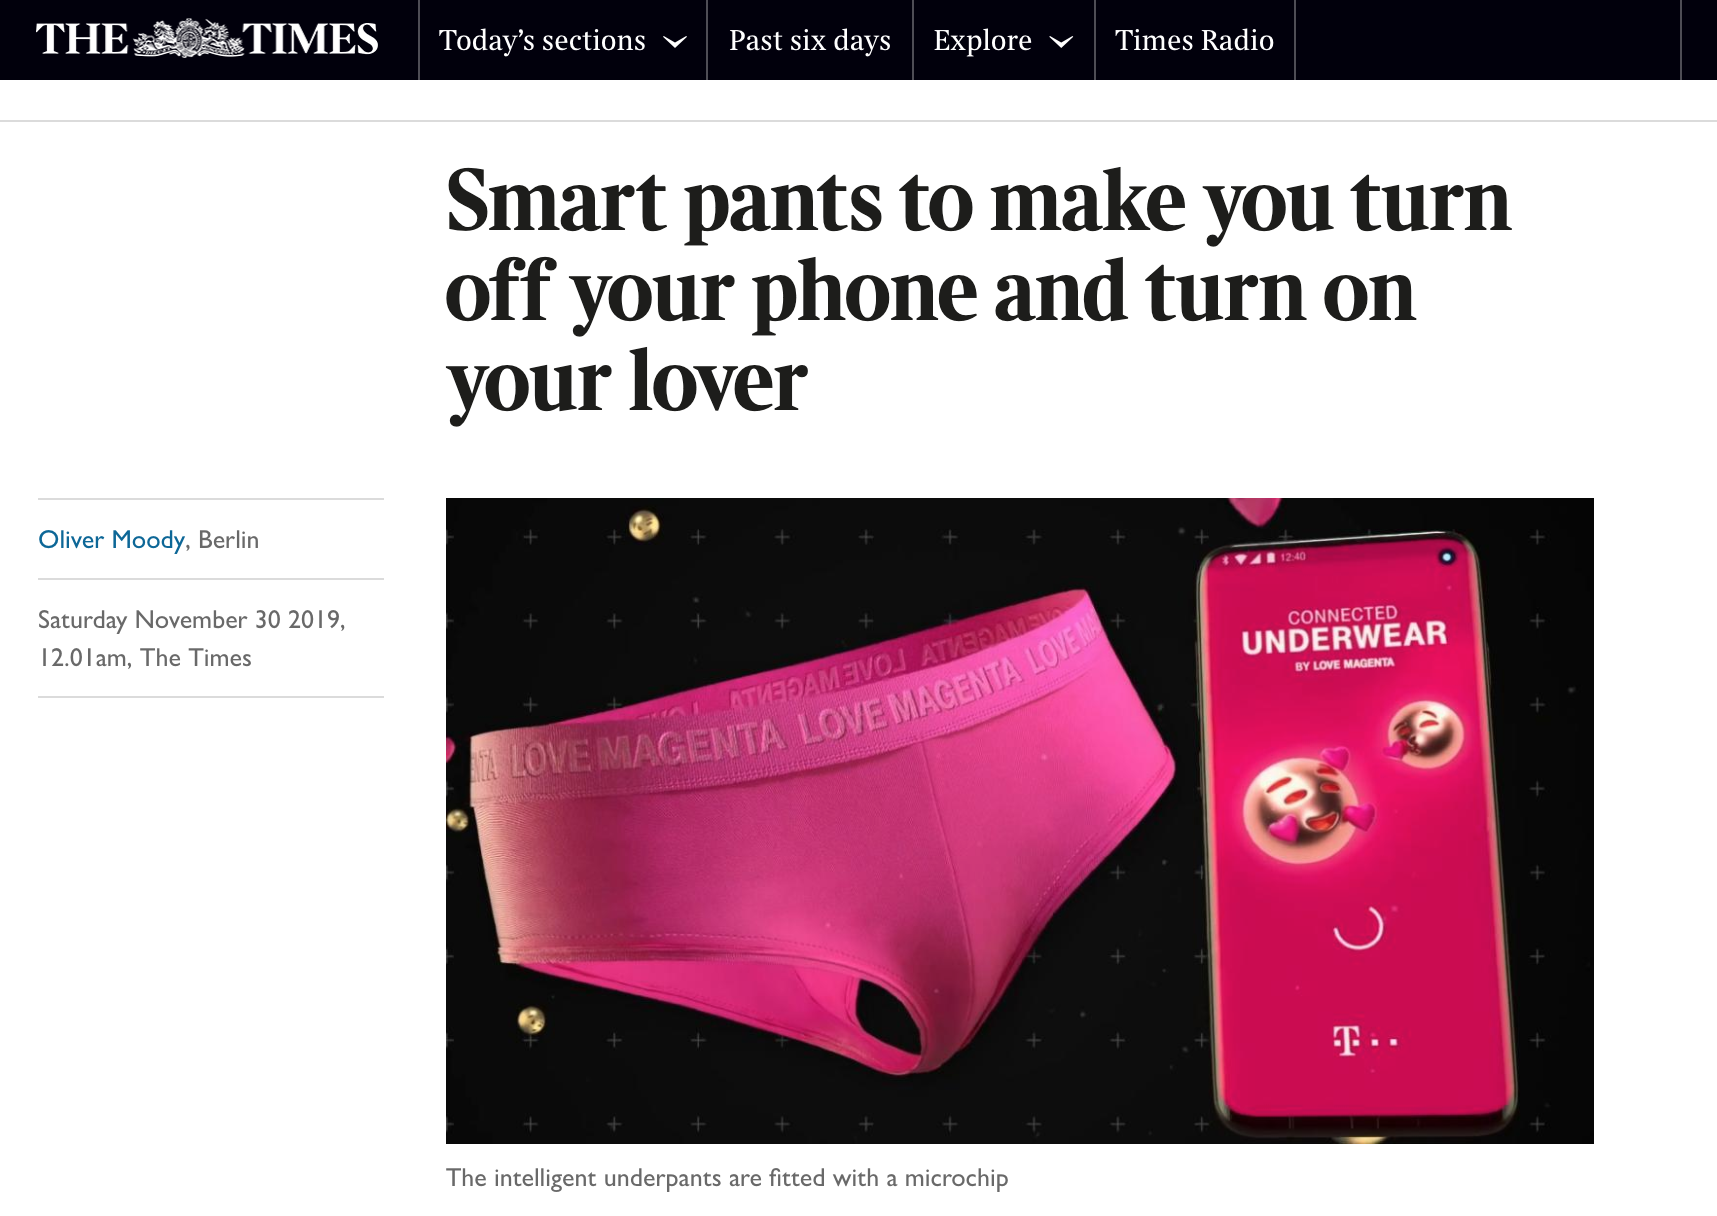 Smart pants to make you turn off your phone and turn on your lover